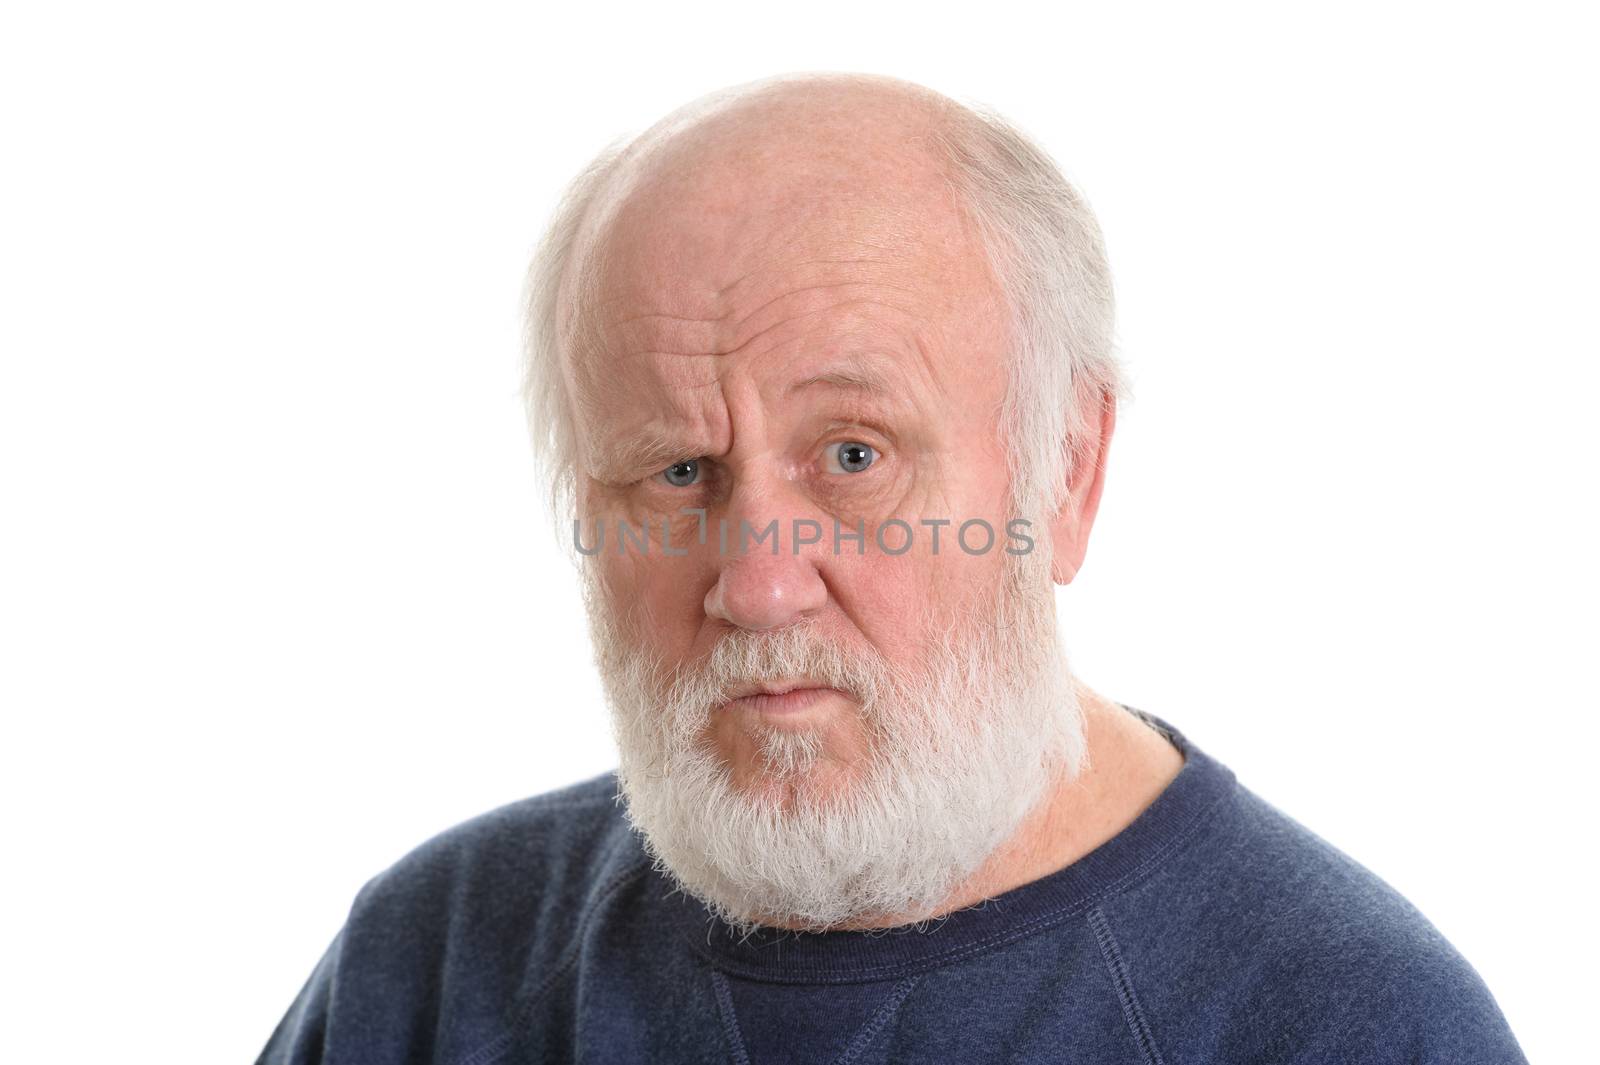 dissatisfied displeased old man isolated portrait by starush